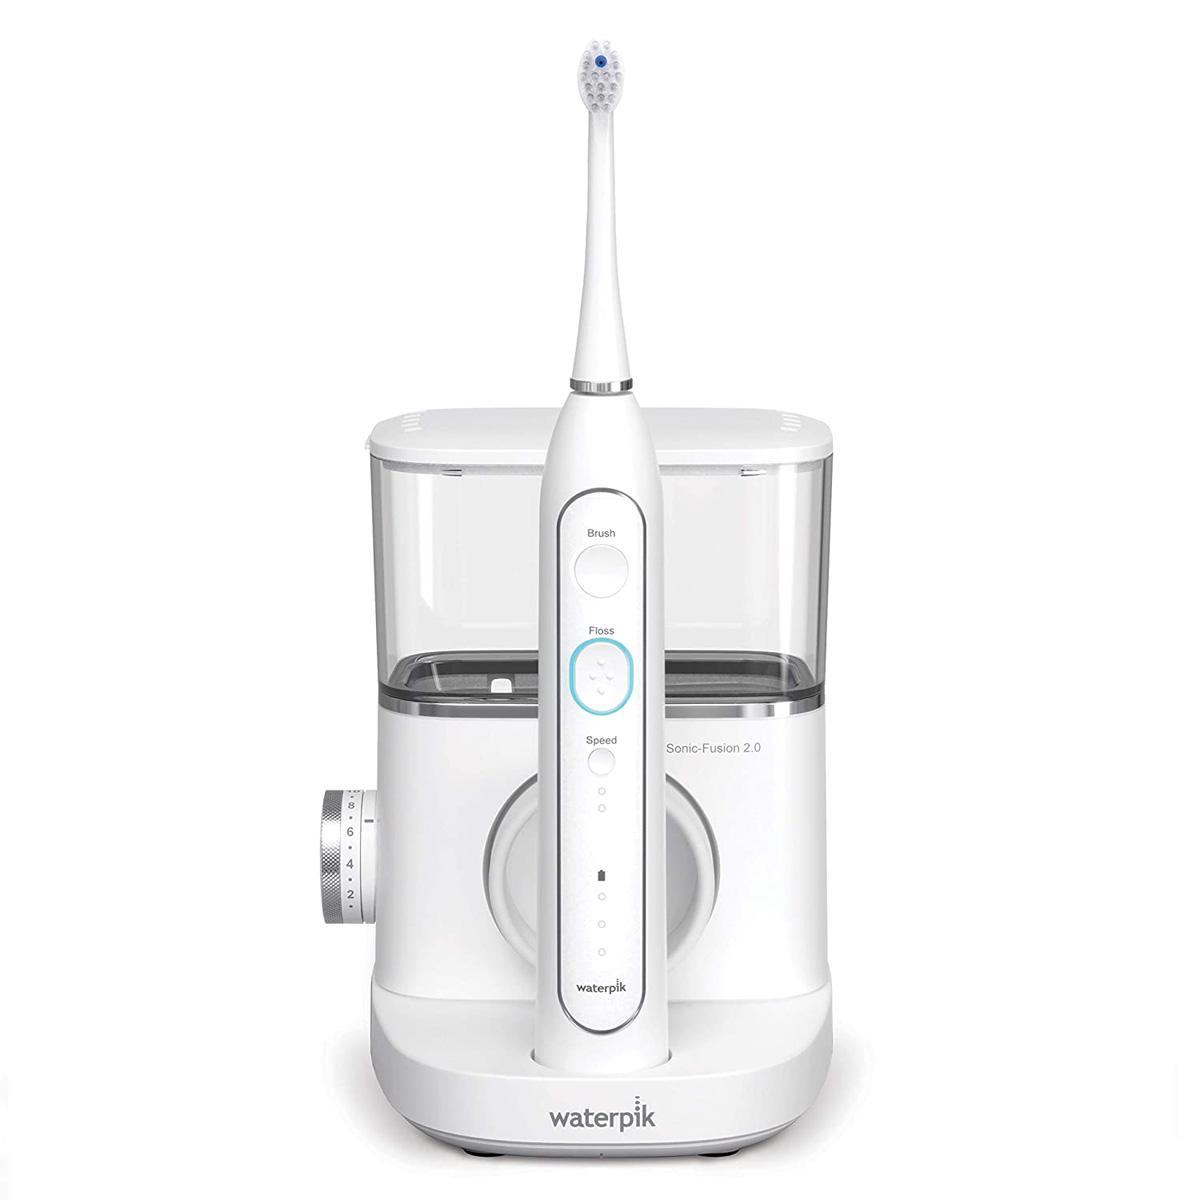 Waterpik Sonic-Fusion 2.0 Professional Flossing Toothbrush for $121 Shipped